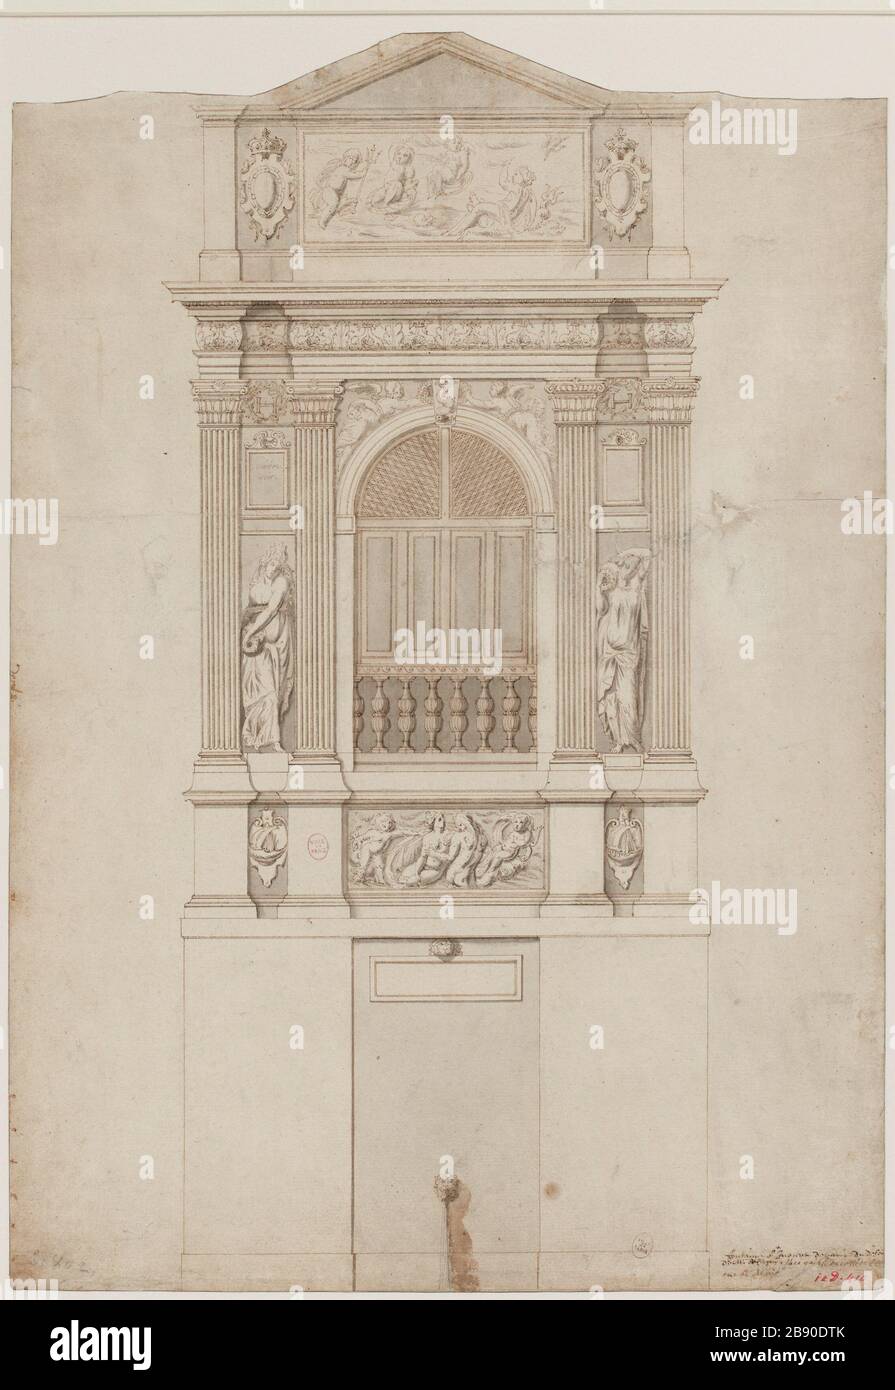 Elevation of the Fountain of the Innocents, facing the Rue Saint-Denis in 1787, current 1st district. Stock Photo